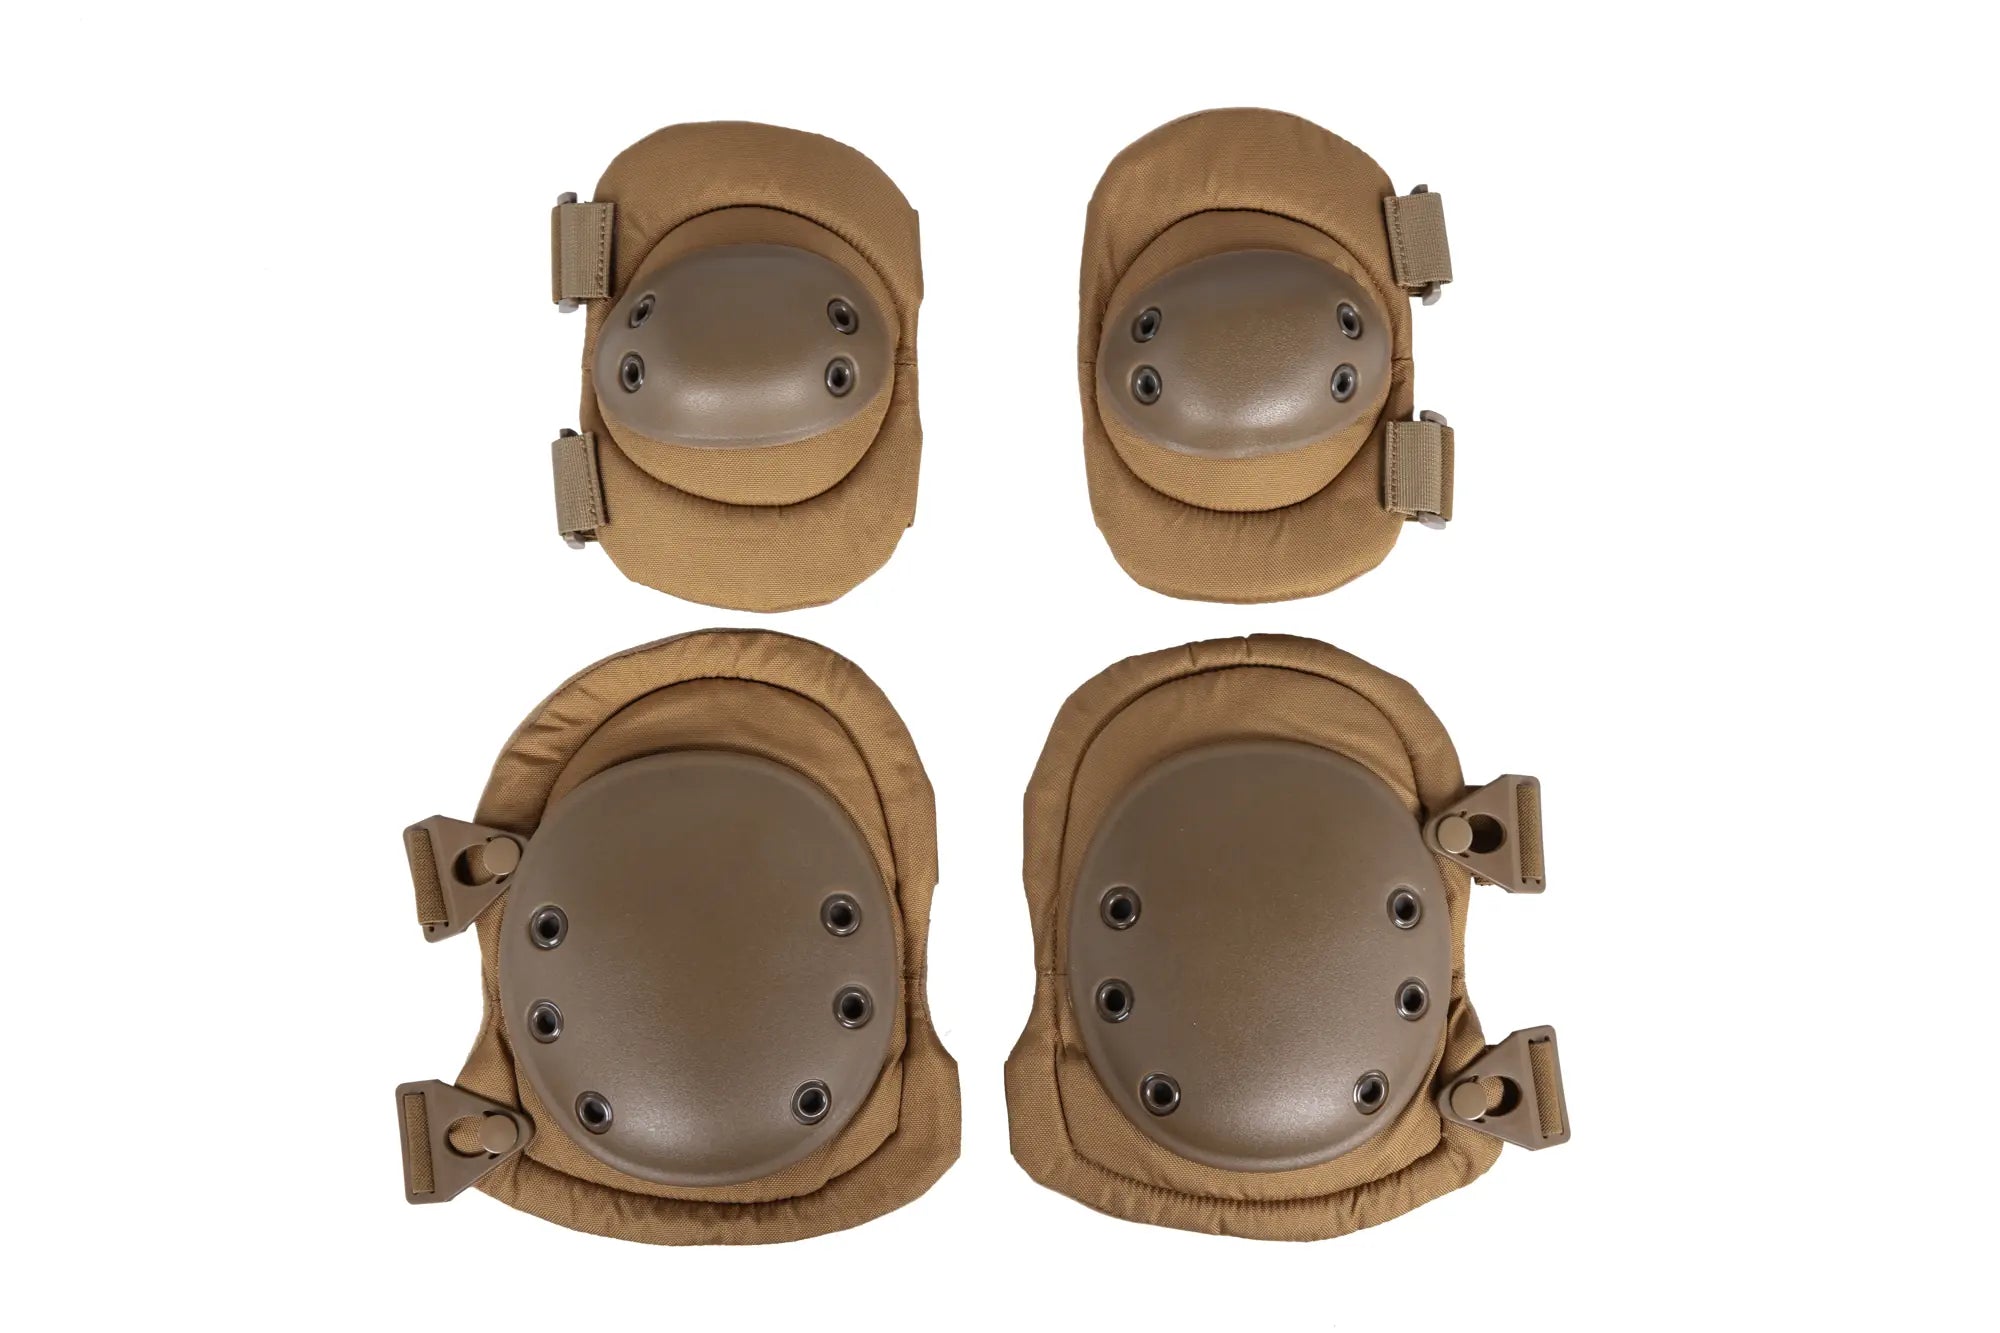 Wosport PA-07 Tan knee and elbow protector set